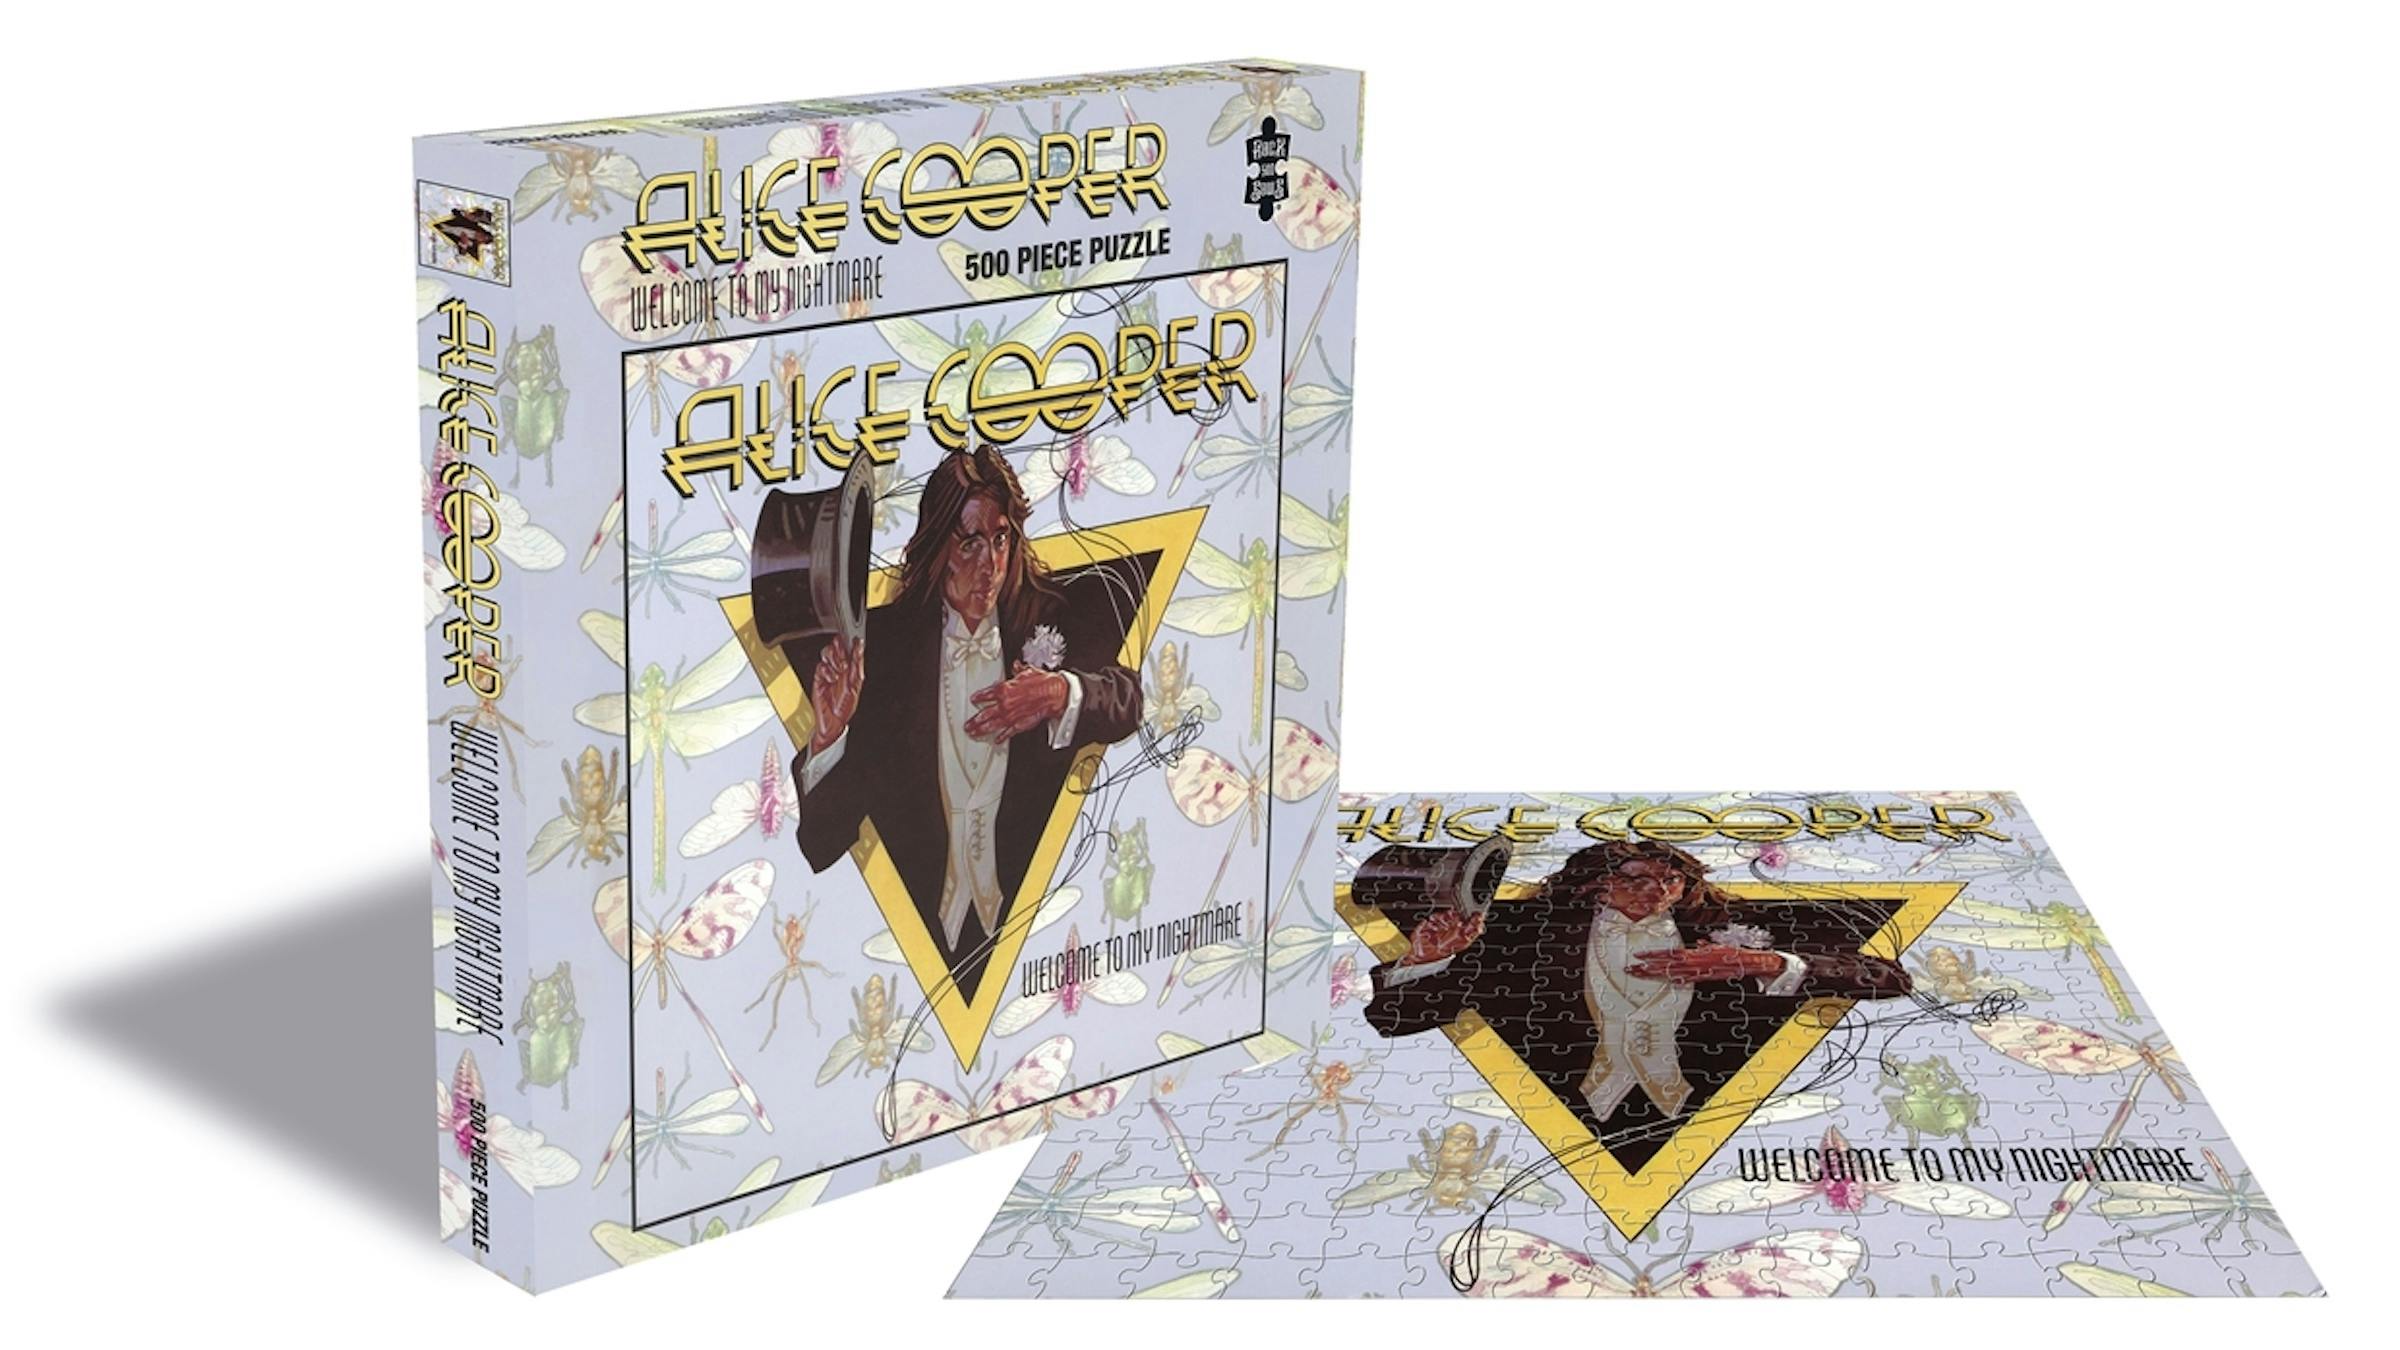 Alice Cooper, Def Leppard, and Scorpions Jigsaw Puzzles Are On Their Way